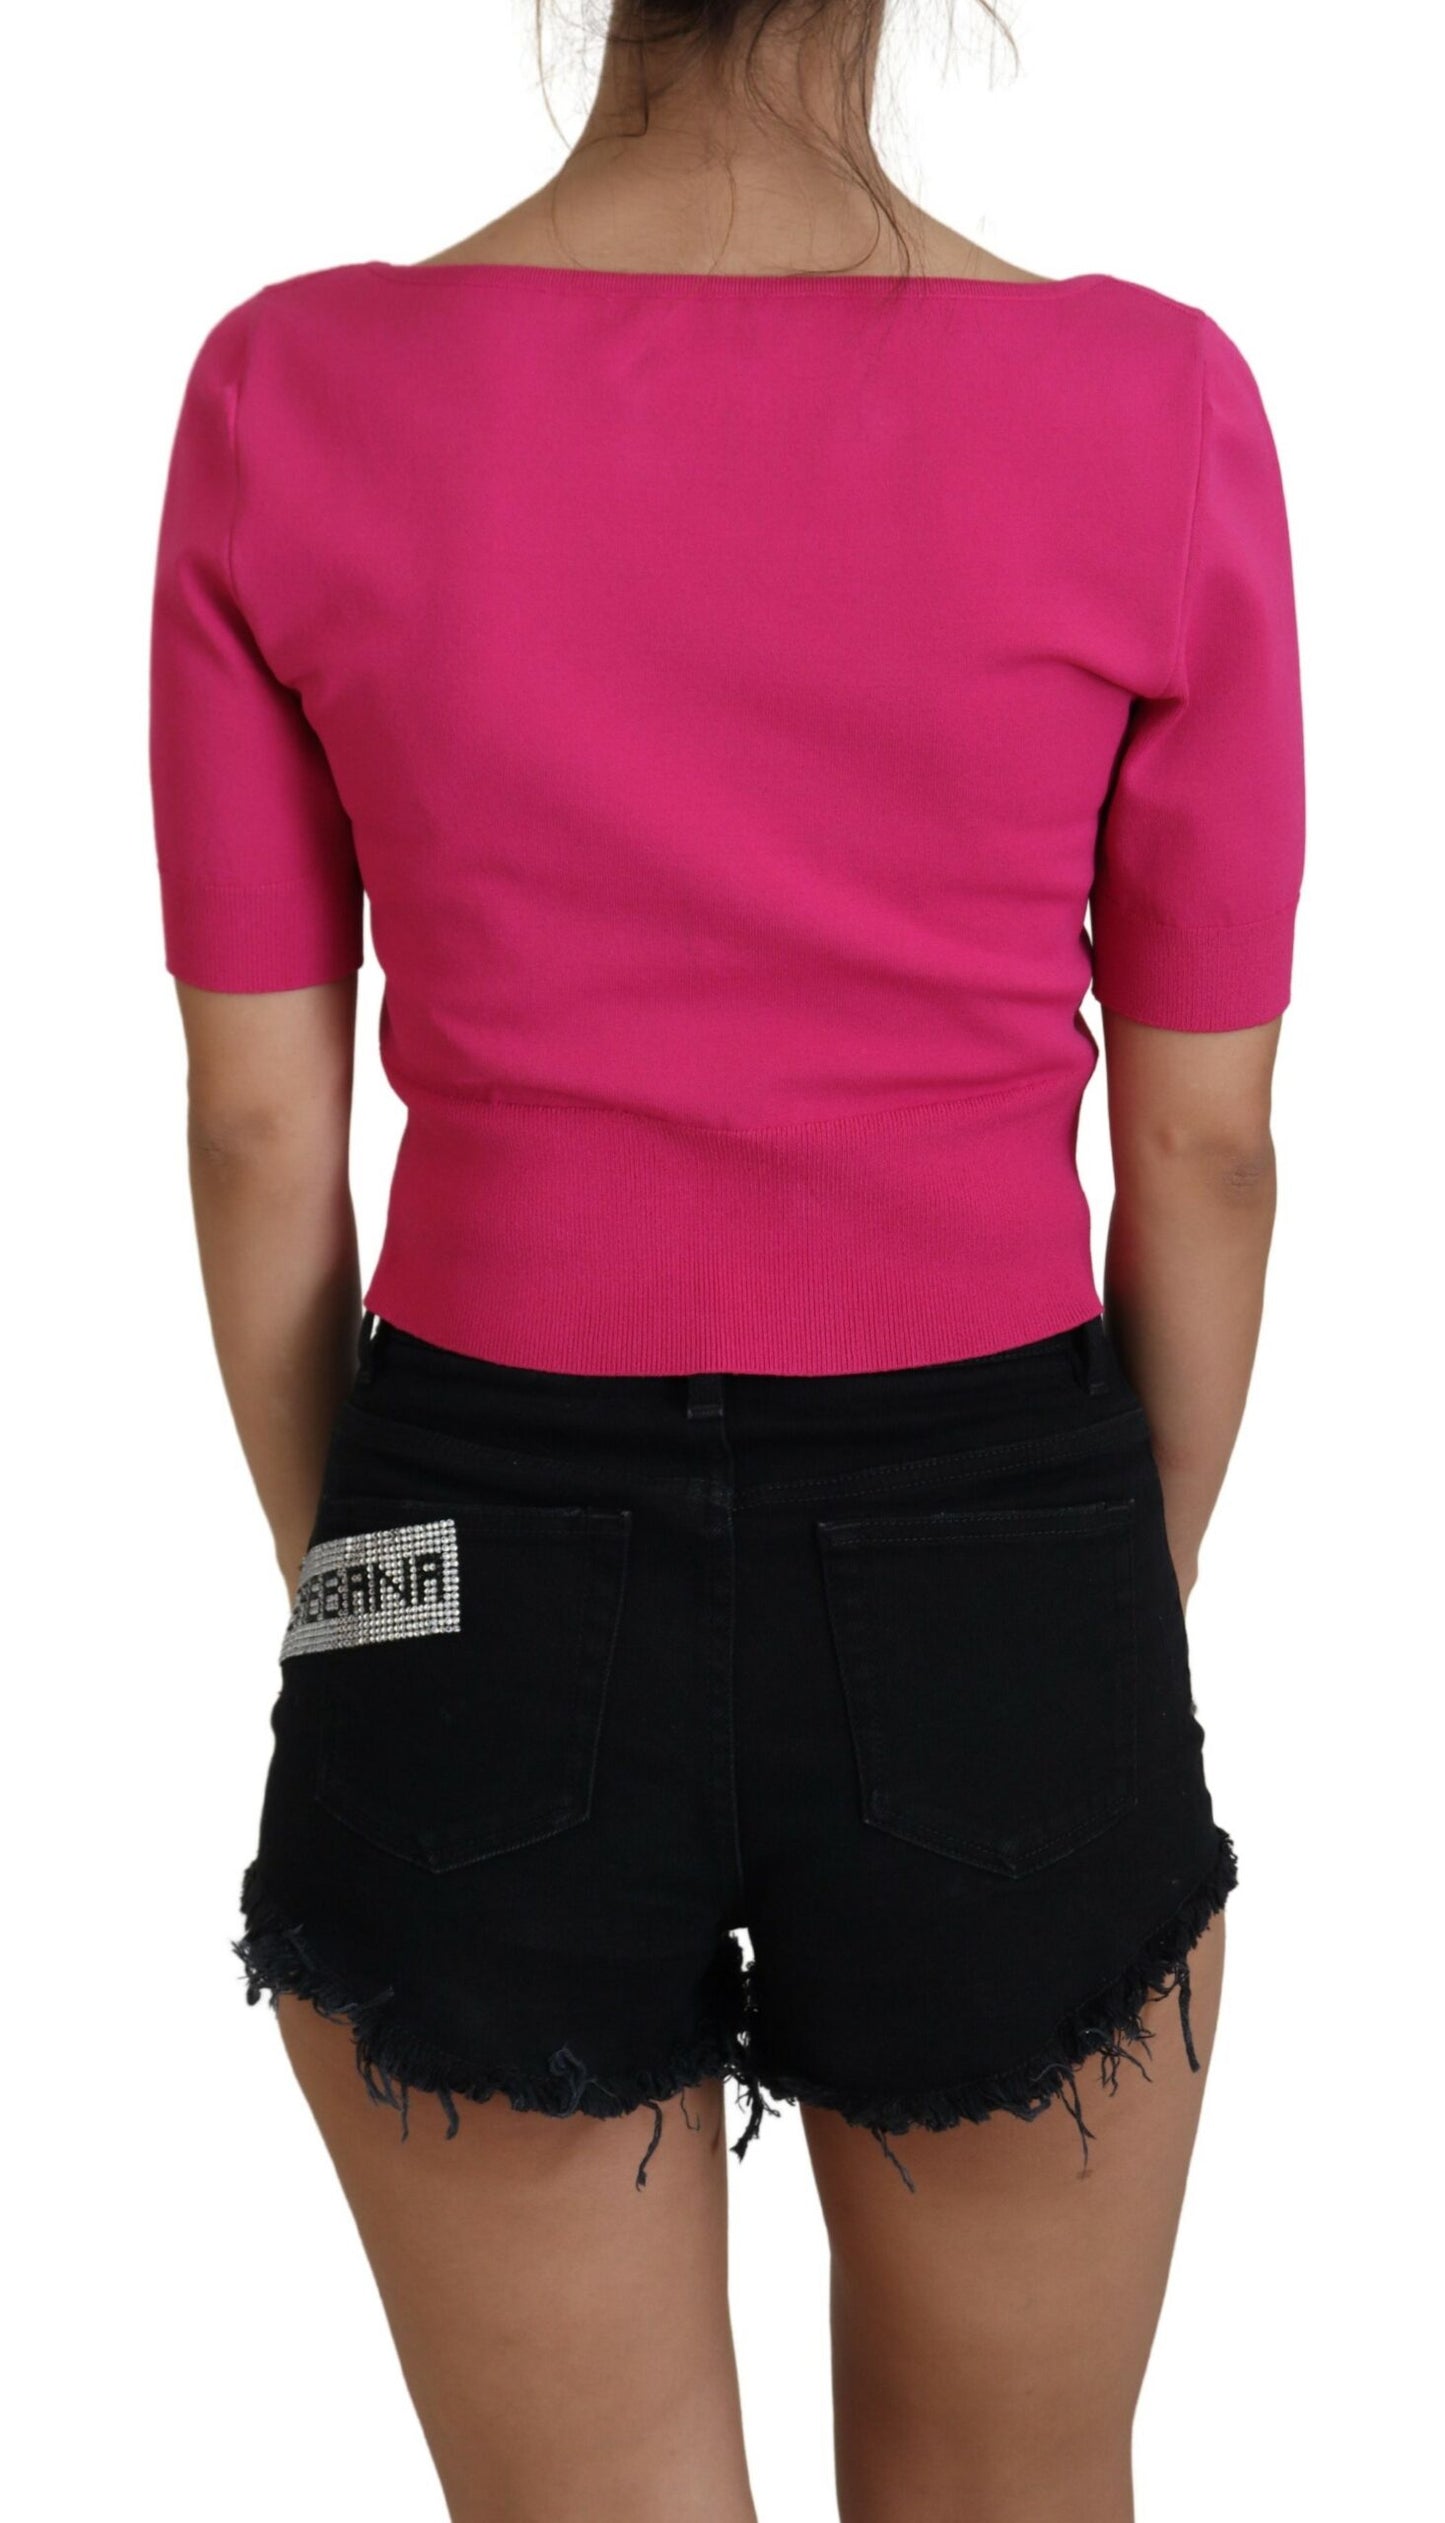 Chic Pink Cropped Top Blouse